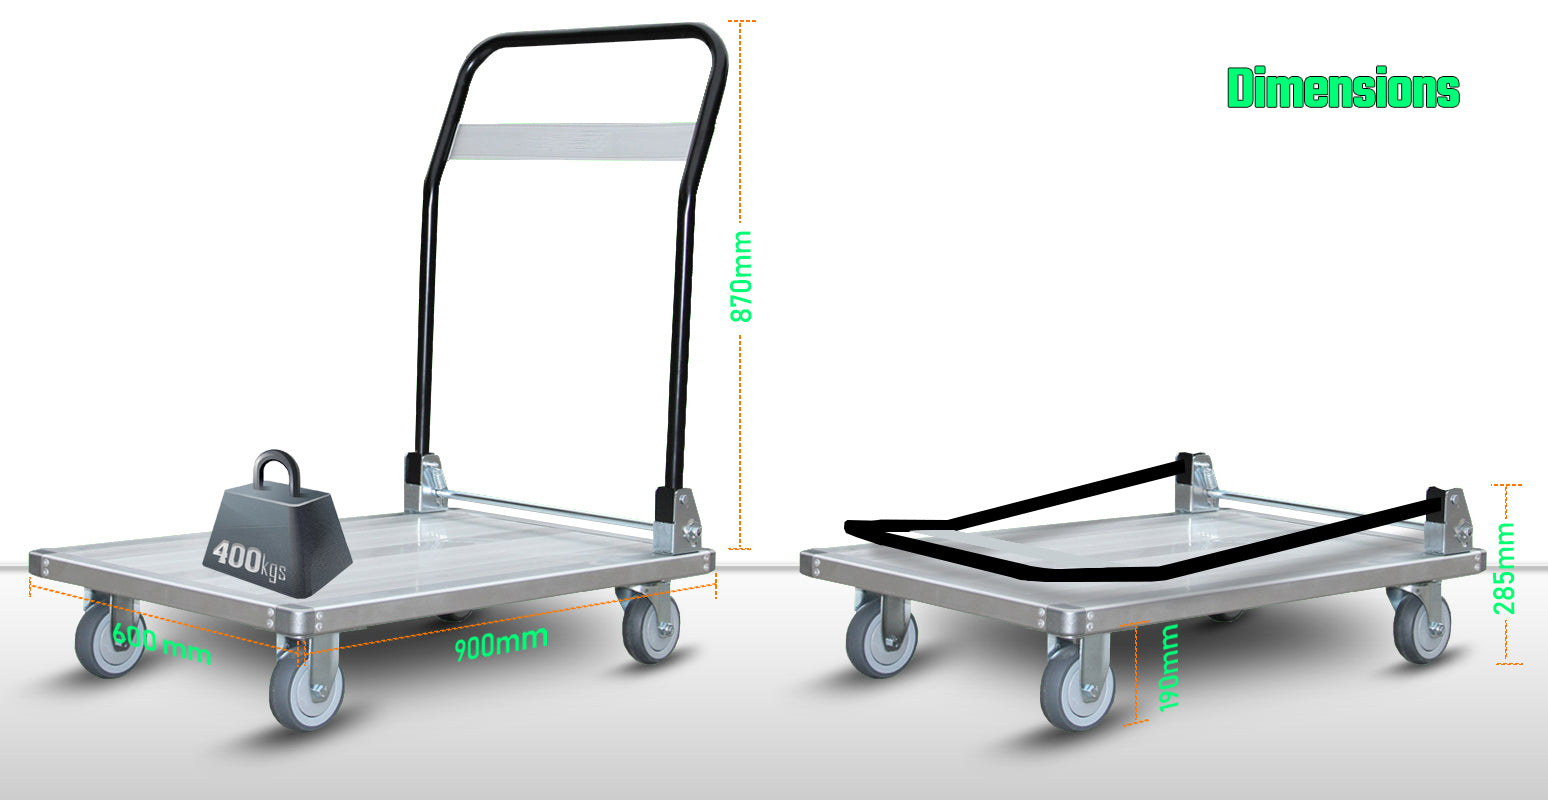 Euro USA Pro Portable Aluminium Platform Trolley 3ft × 2ft - Heavy Duty 400kg rated - Made in USA - Collapsible Hand Rail - Durable Noiseless Sillicon Wheels - High Ground Clearance - Anti Skid Platform